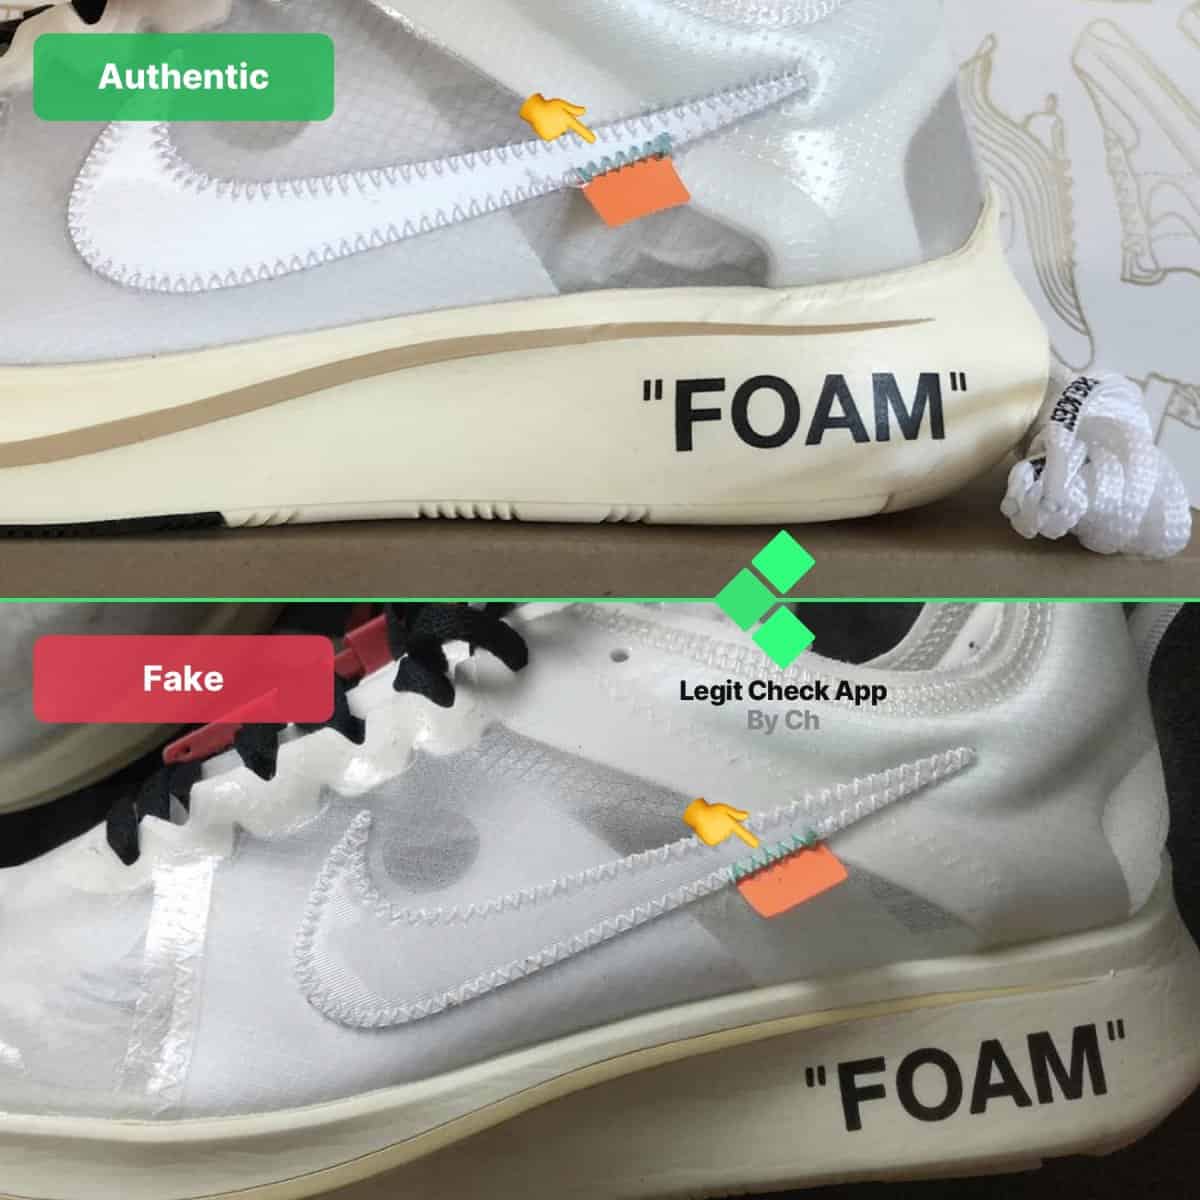 How To Spot Fake Off-White Nike Zoom Fly -Real Vs Fake OW Zoom Fly 